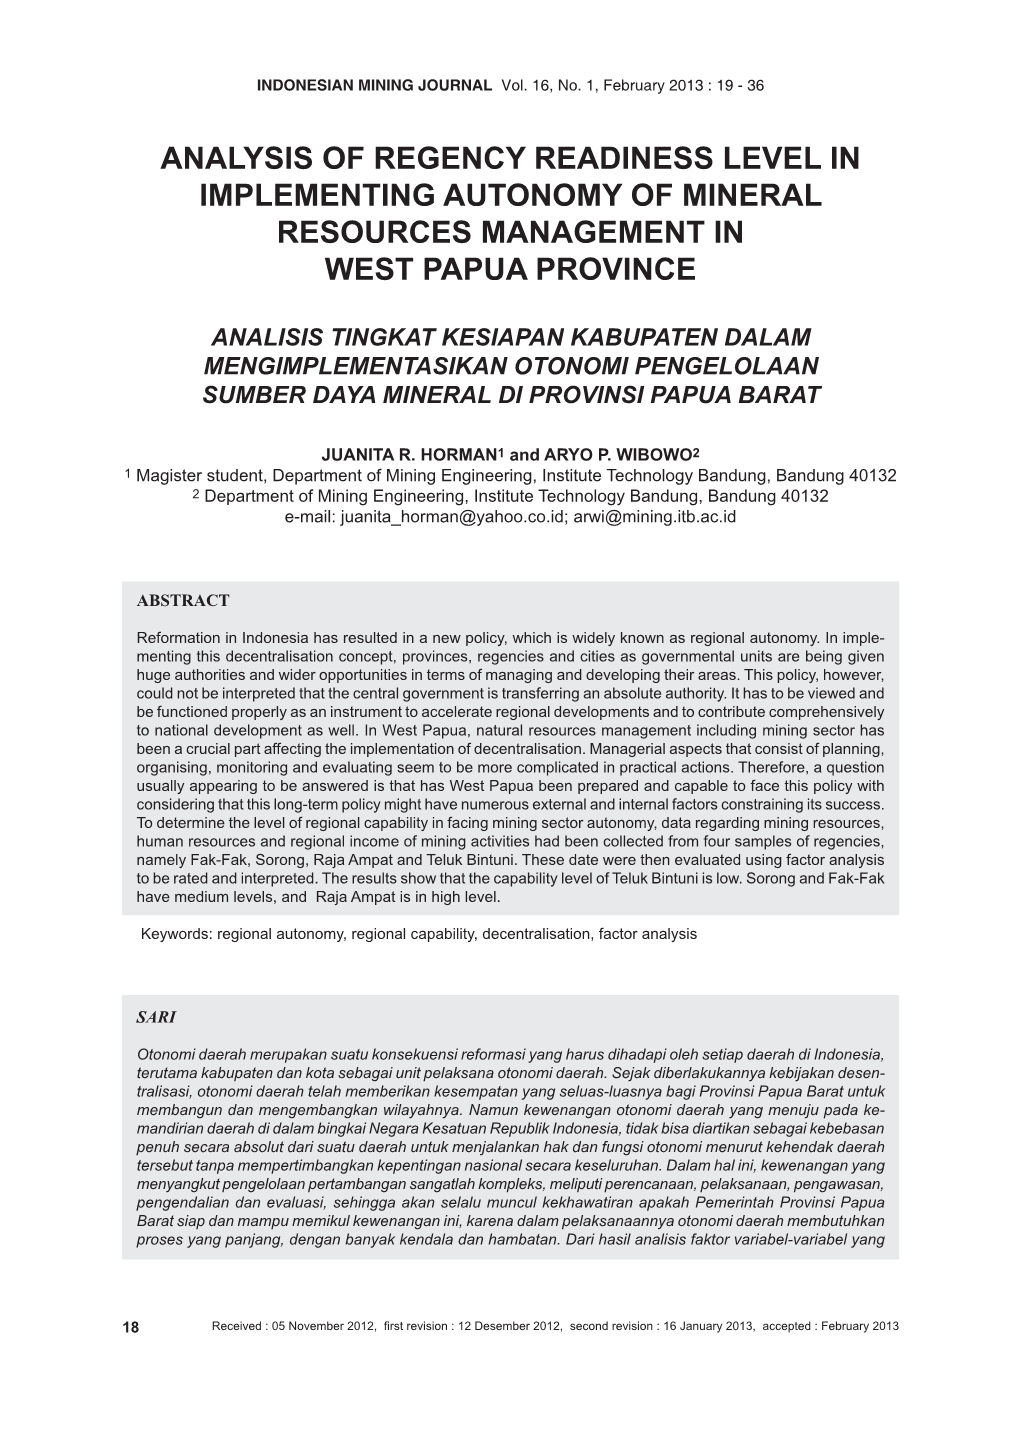 Analysis of Regency Readiness Level in Implementing Autonomy of Mineral Resources Management in West Papua Province